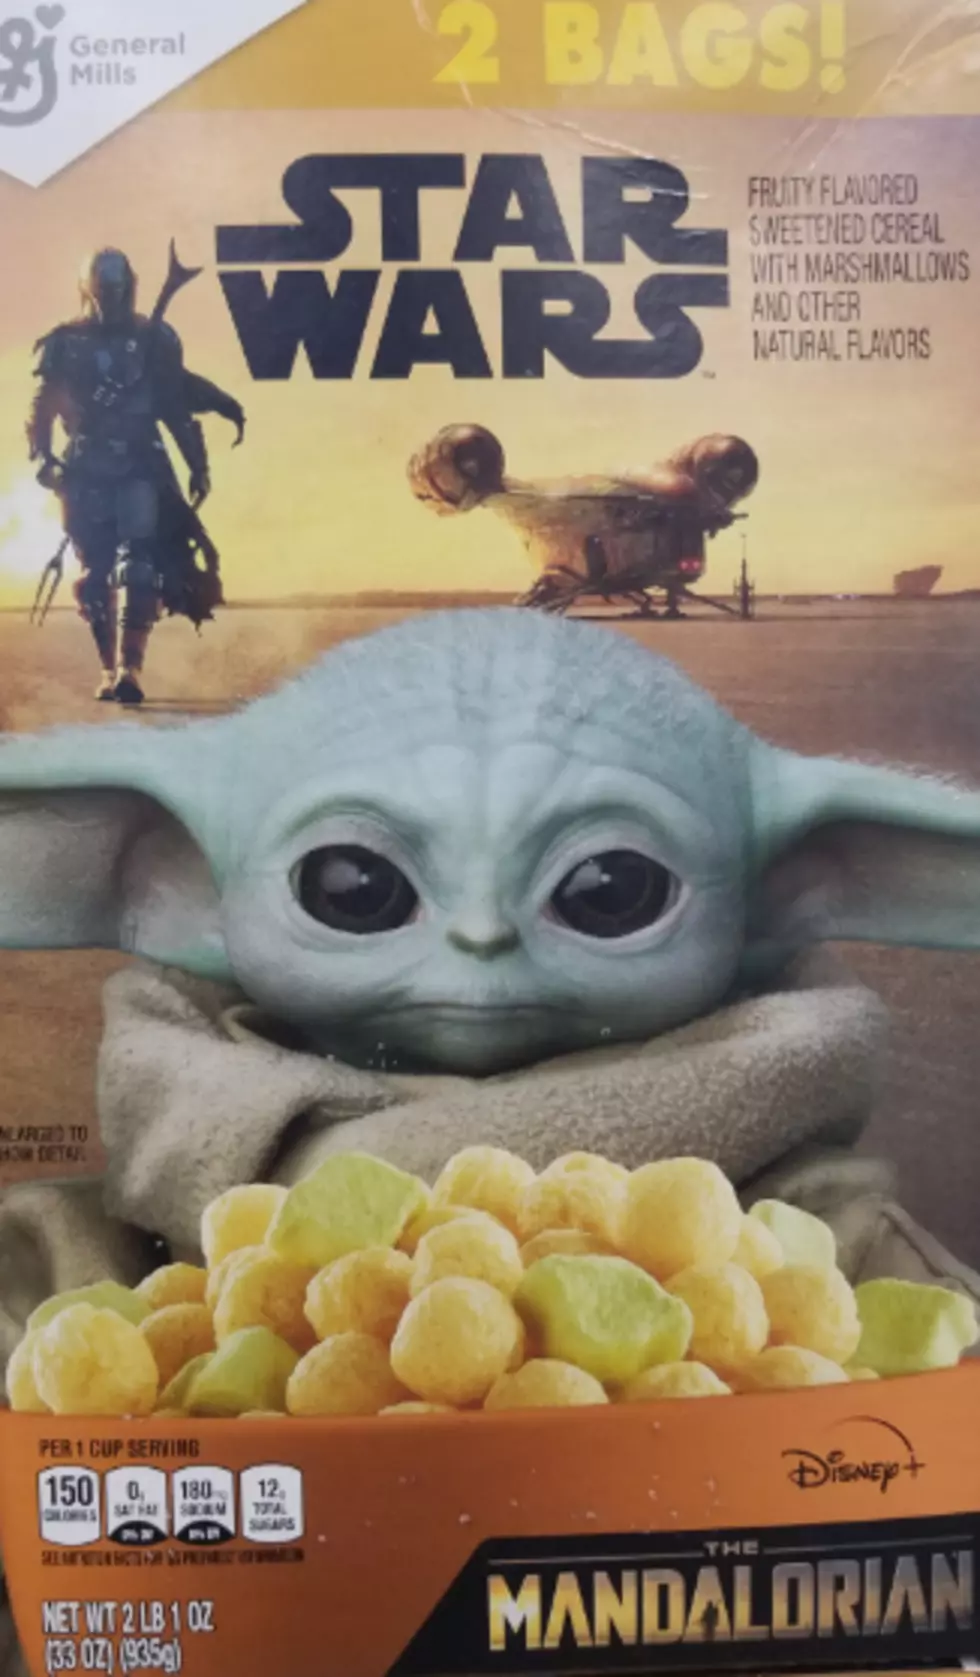 Baby Yoda On The Shelves-Check It Out!